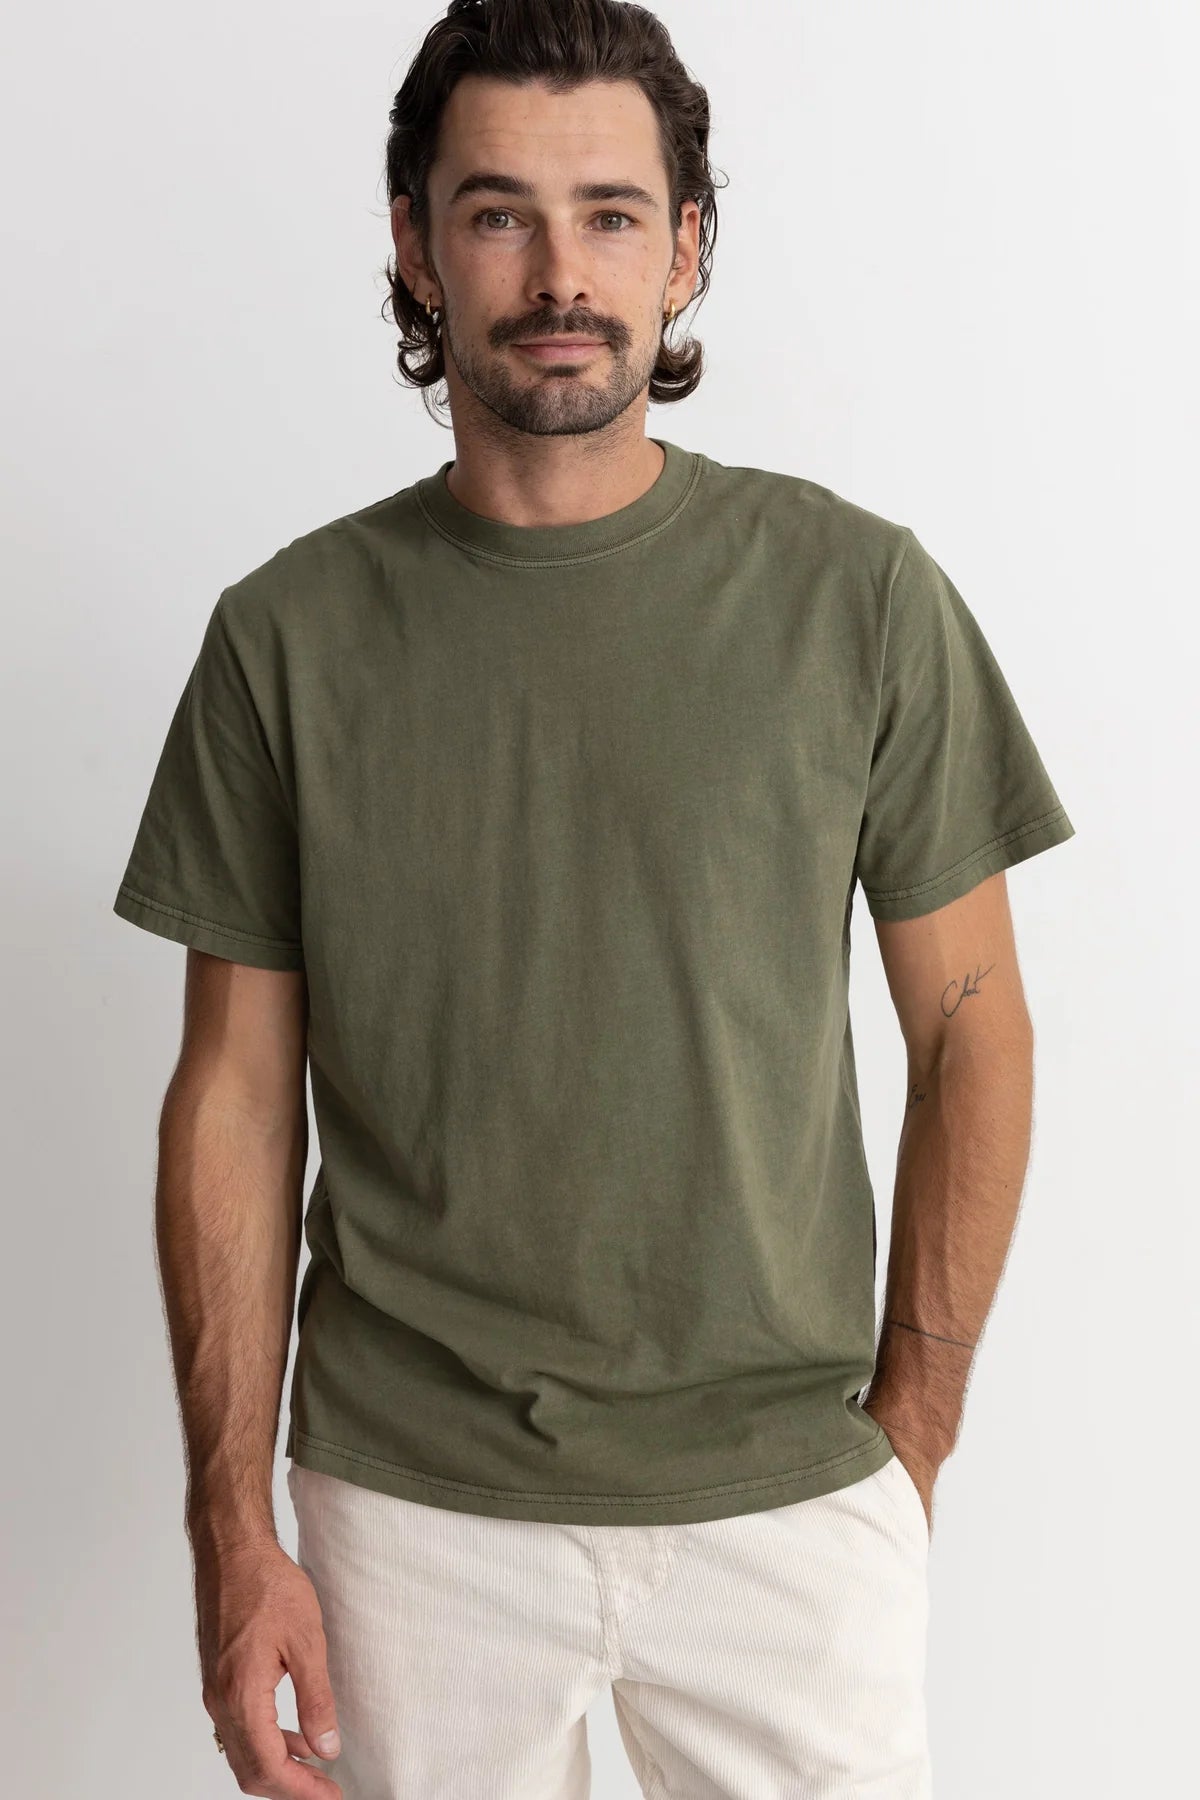 Front view of men's olive colored short sleeve tshirt